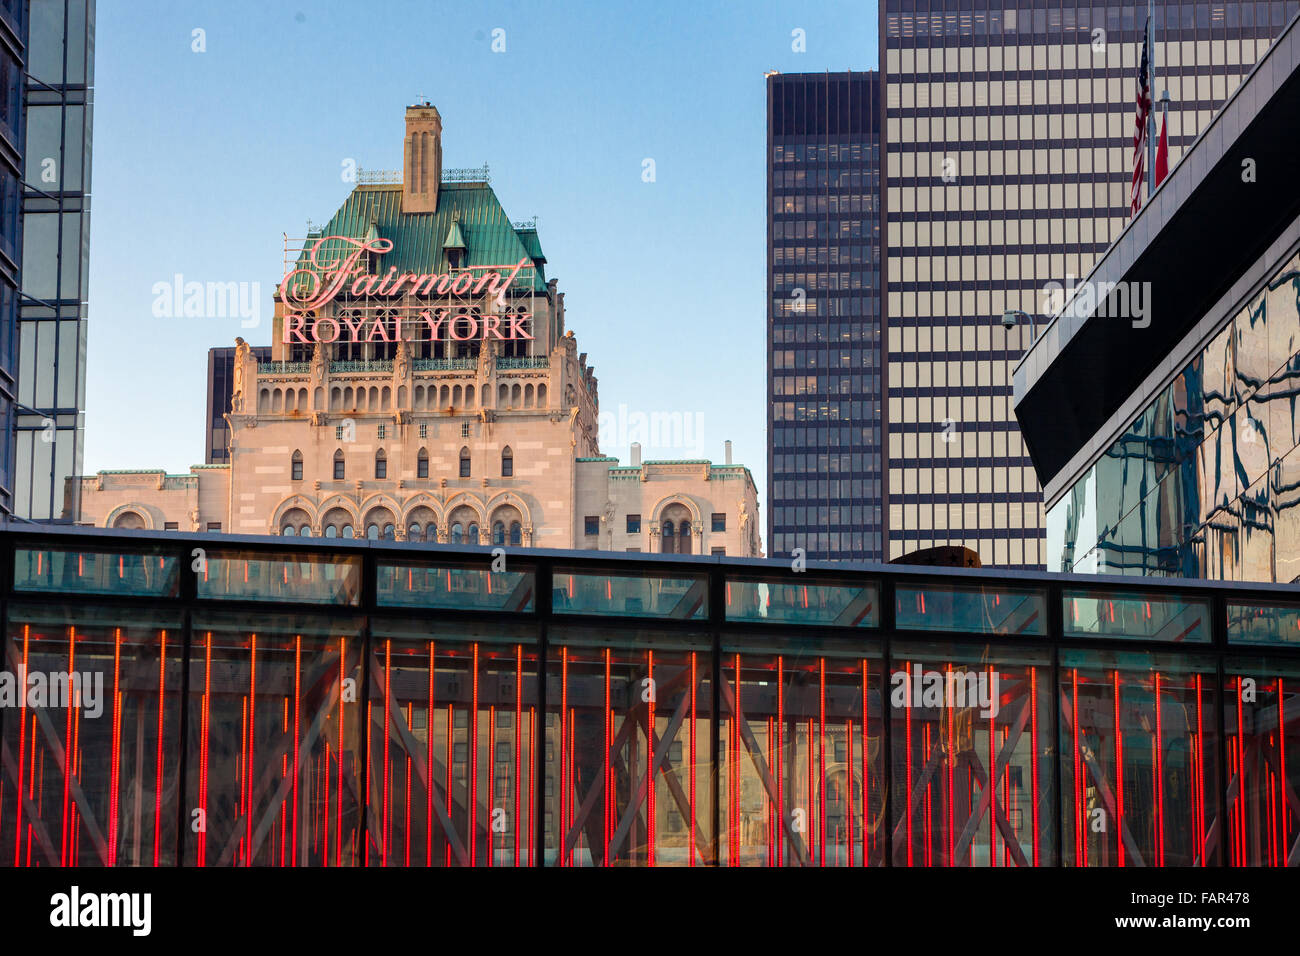 A view of The Royal York Hotel framed by other buildings and structures. Stock Photo